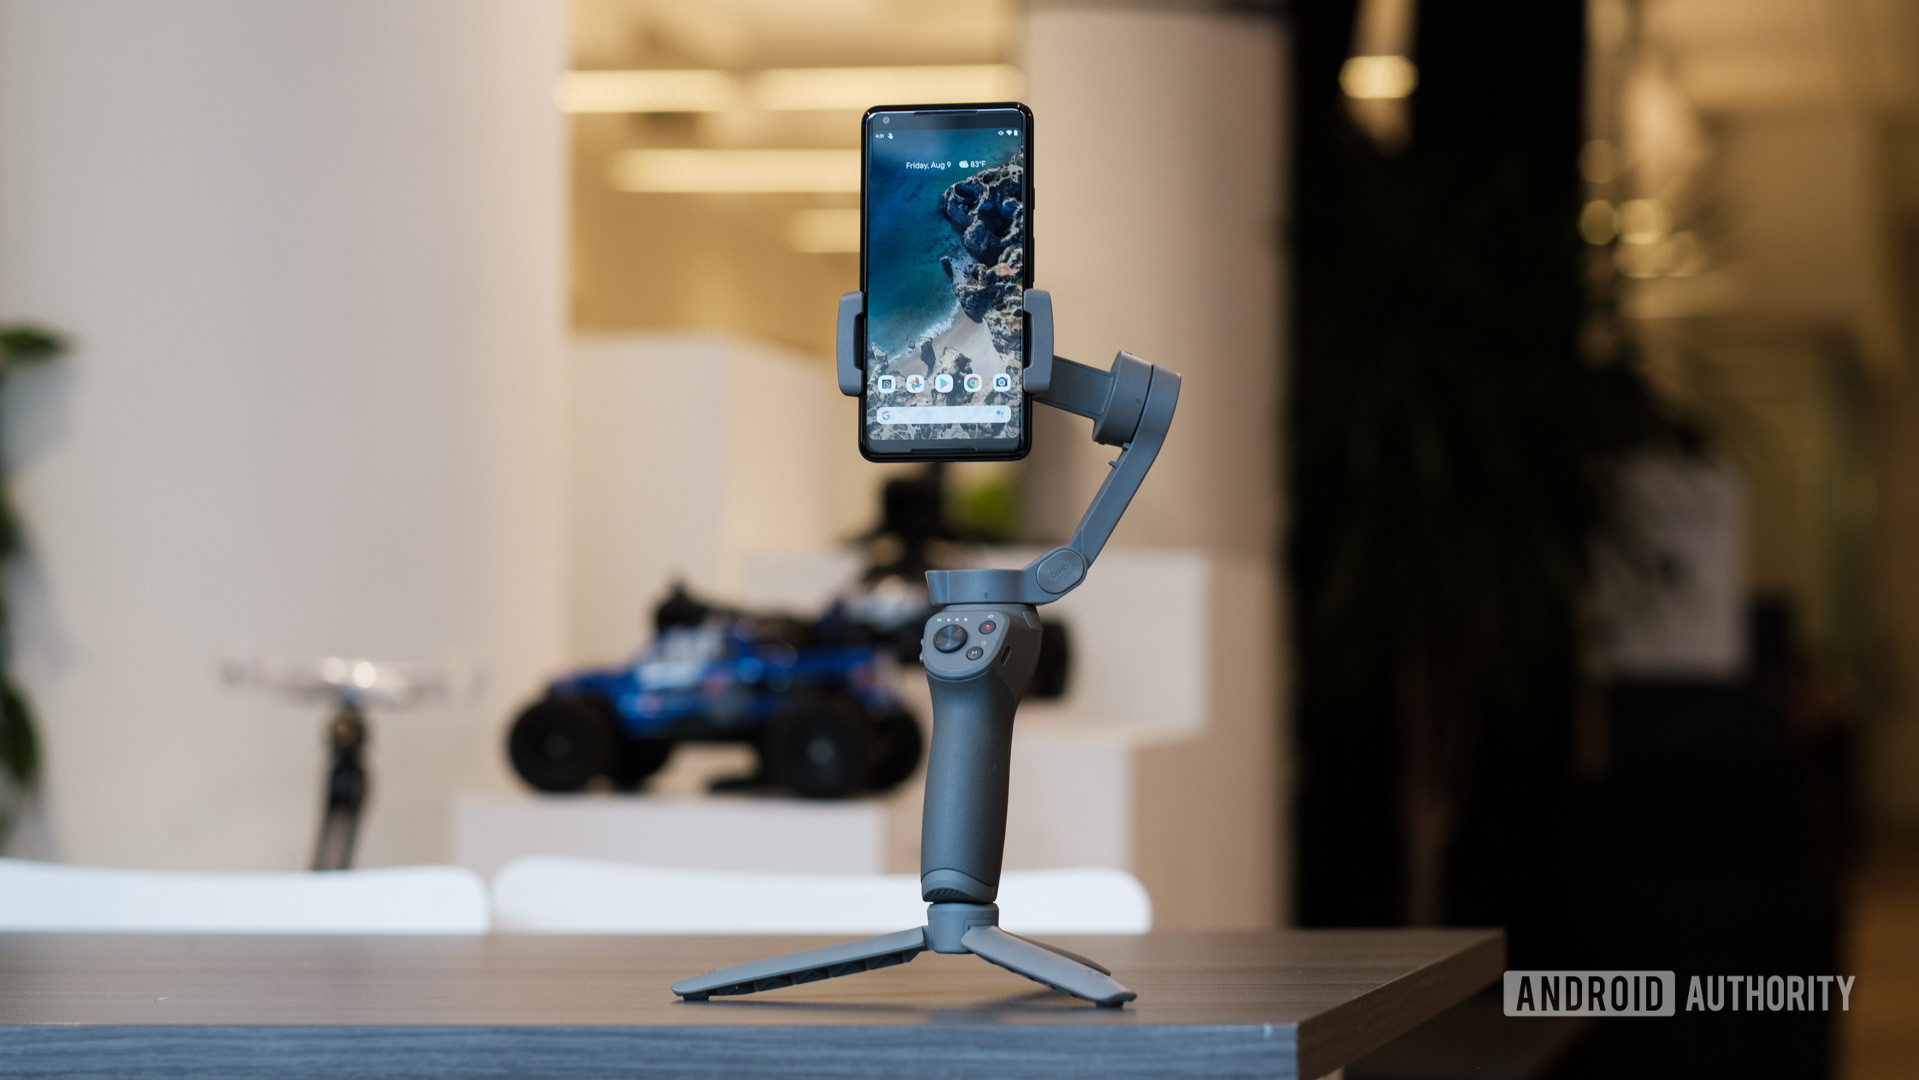 DJI Osmo Mobile 3 review: A terrific smartphone gimbal - Android